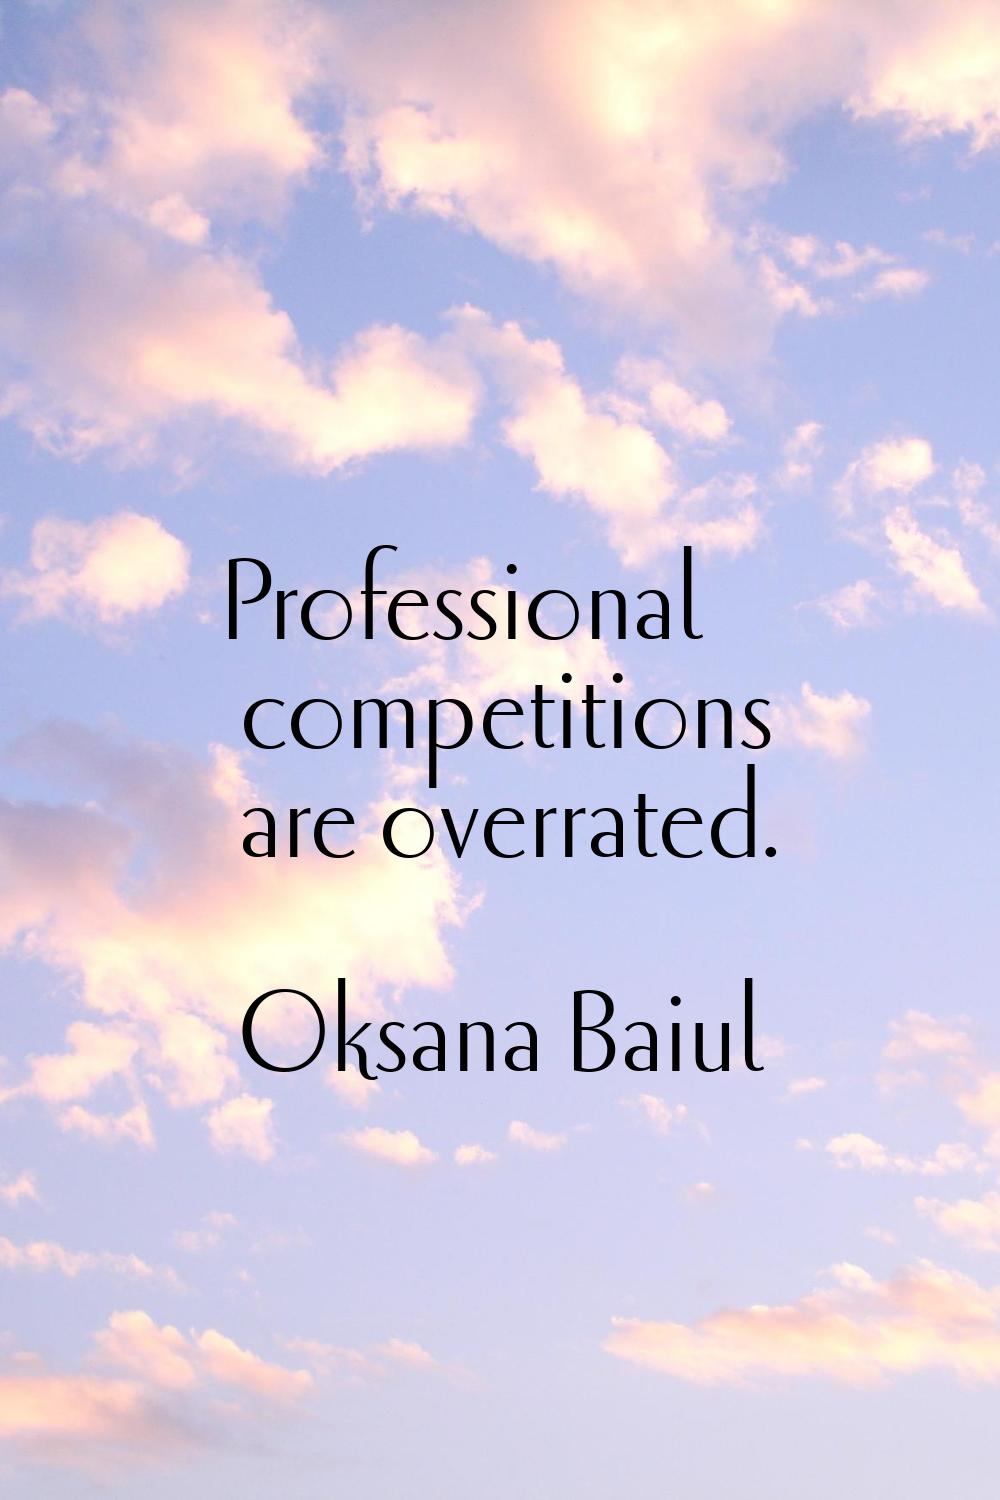 Professional competitions are overrated.